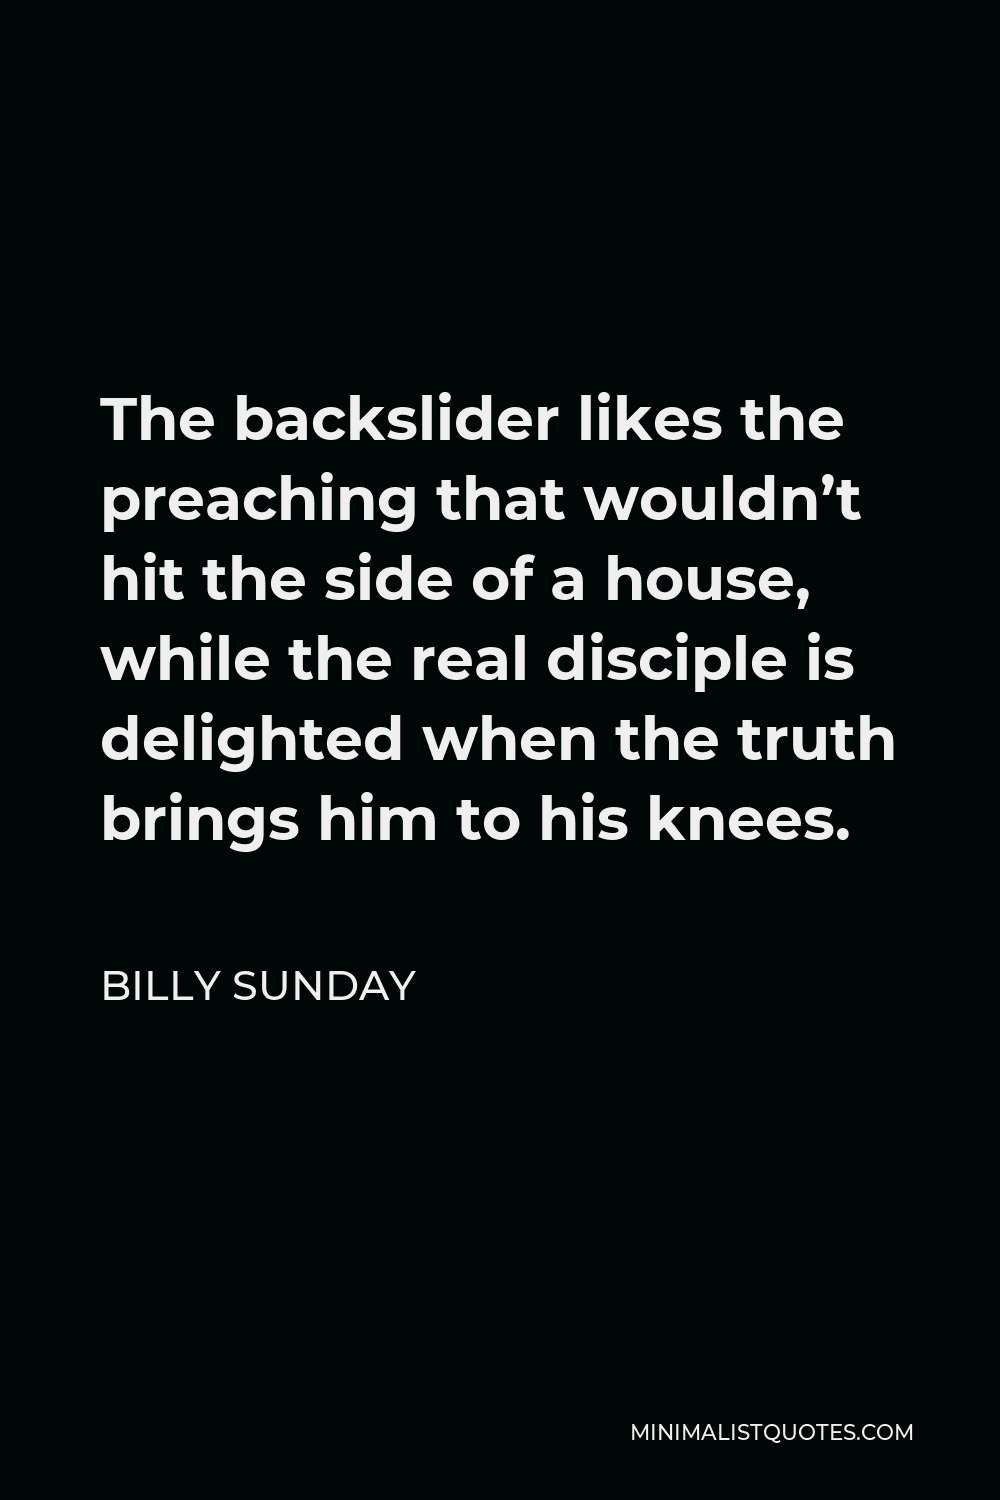 Billy Sunday Quote - The backslider likes the preaching that wouldn’t hit the side of a house, while the real disciple is delighted when the truth brings him to his knees.